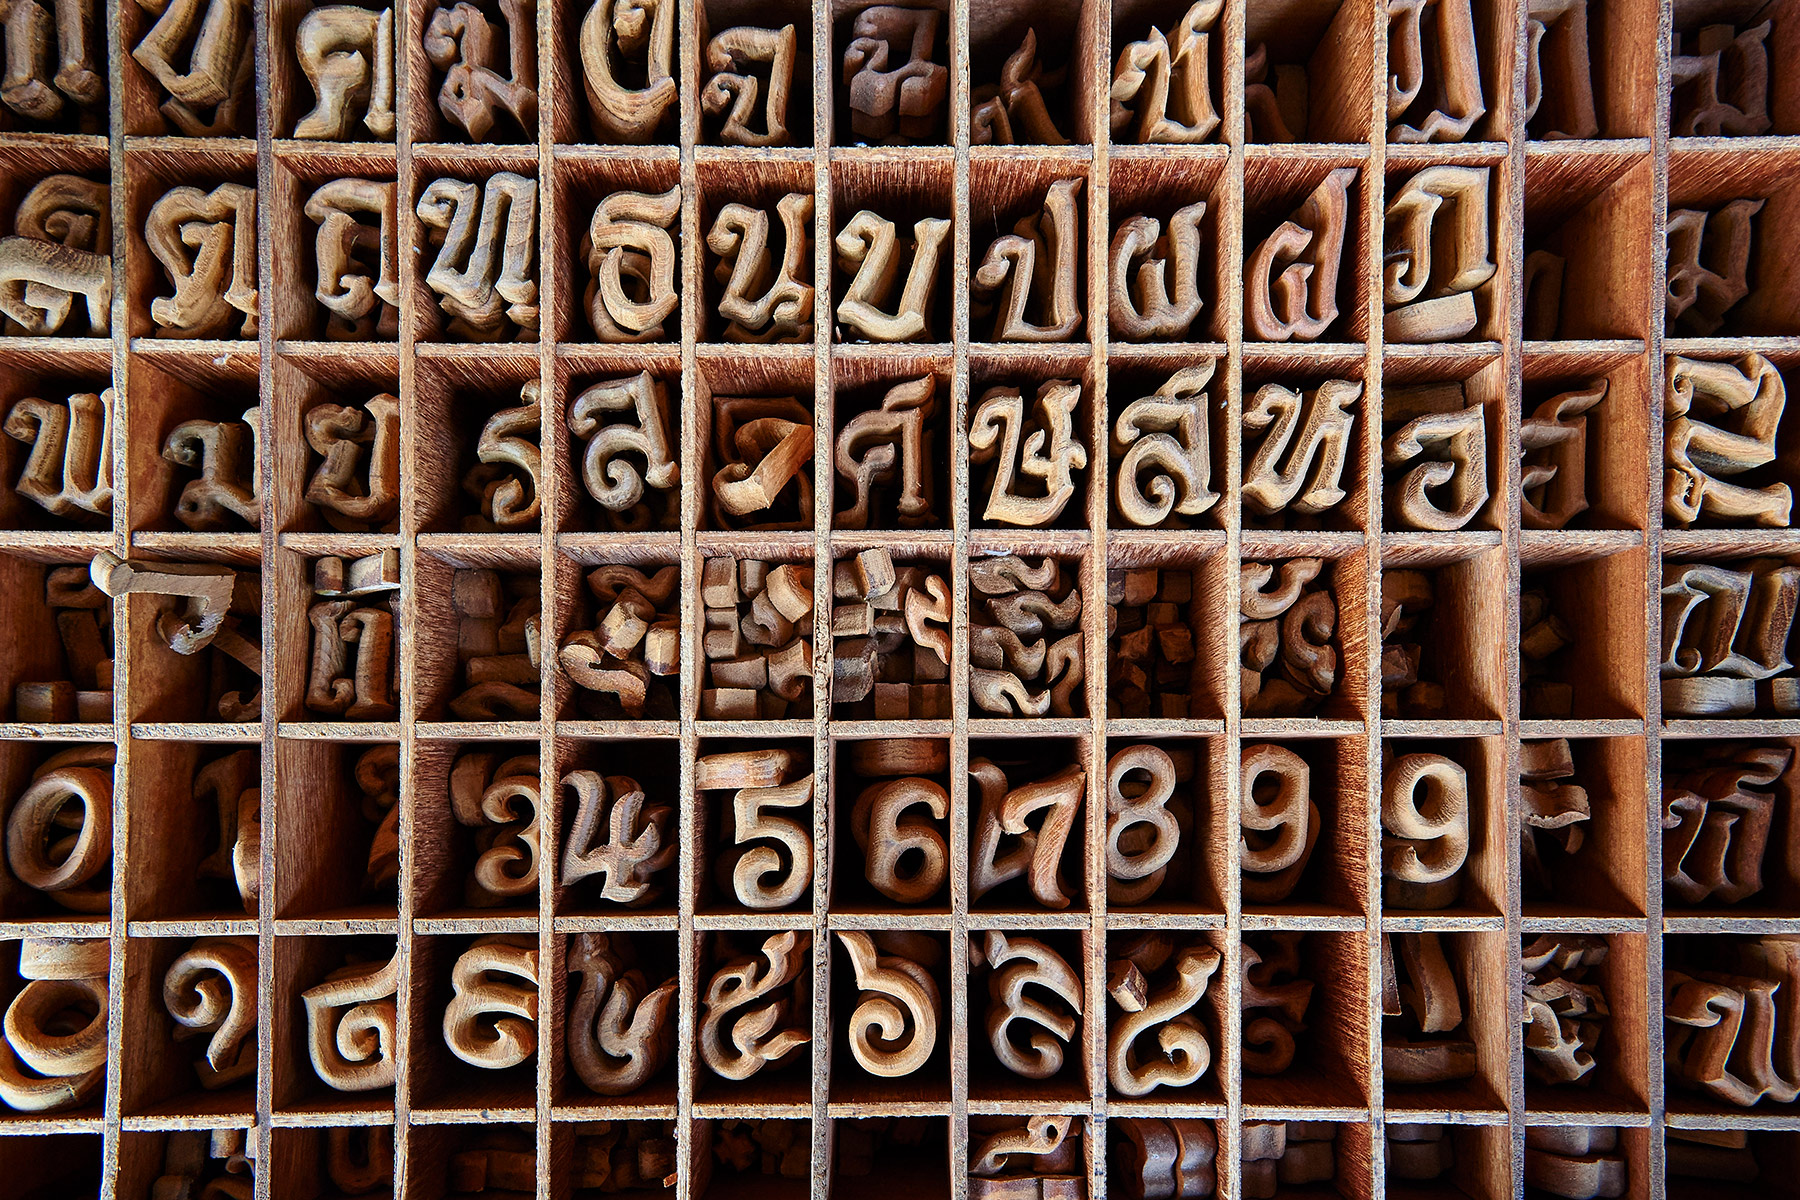 Wooden blocks in the shape of Thai letters